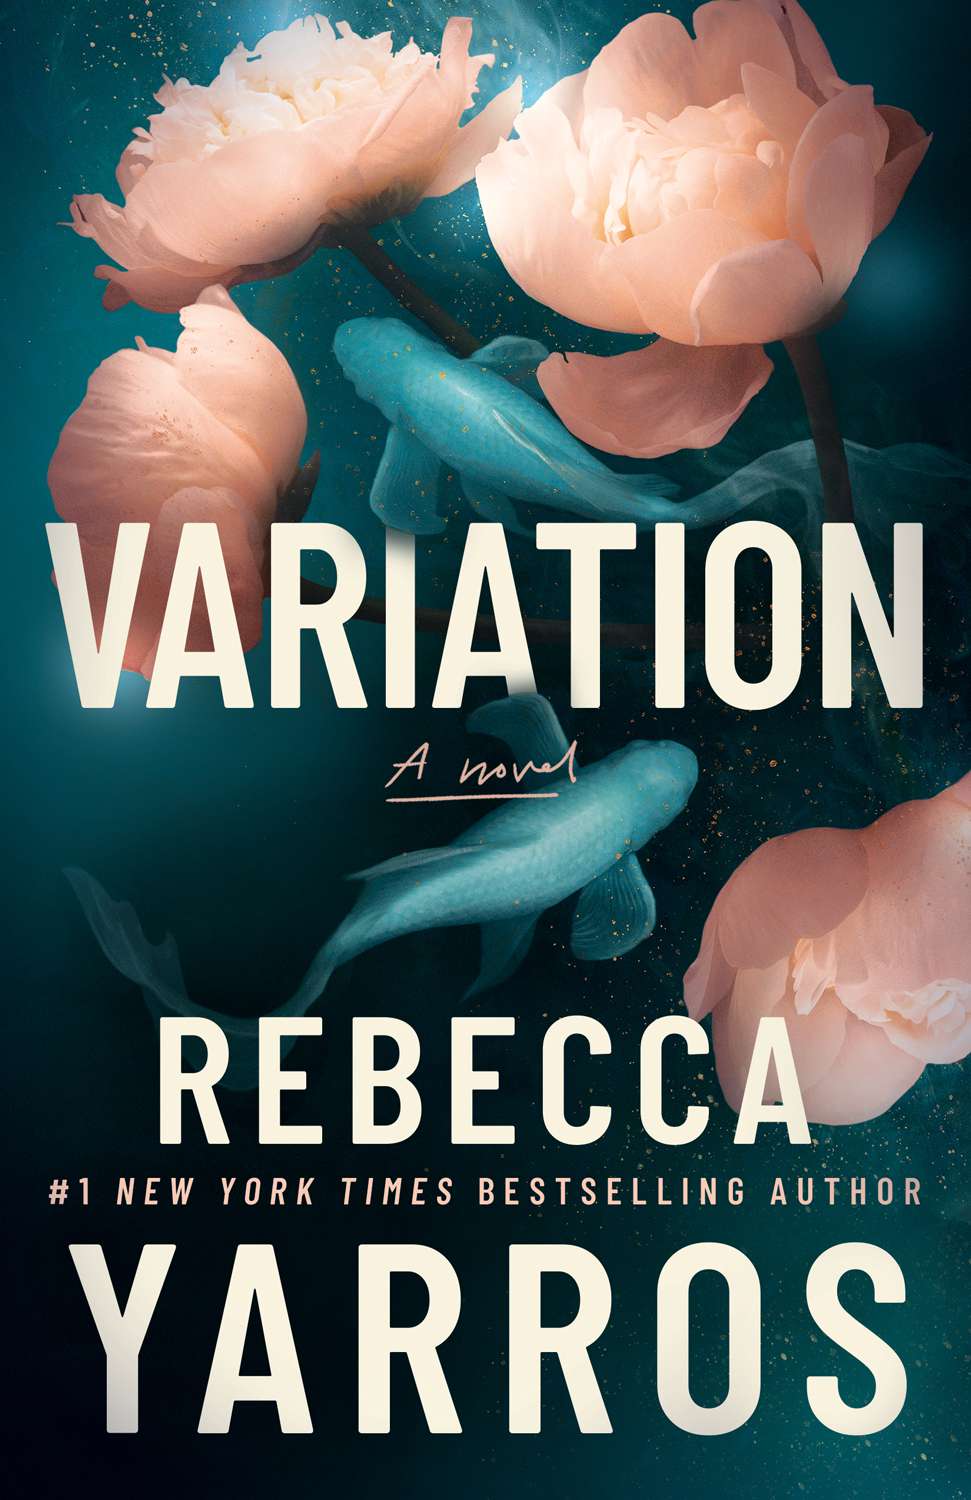 The cover of 'Variation' by Rebecca Yarros